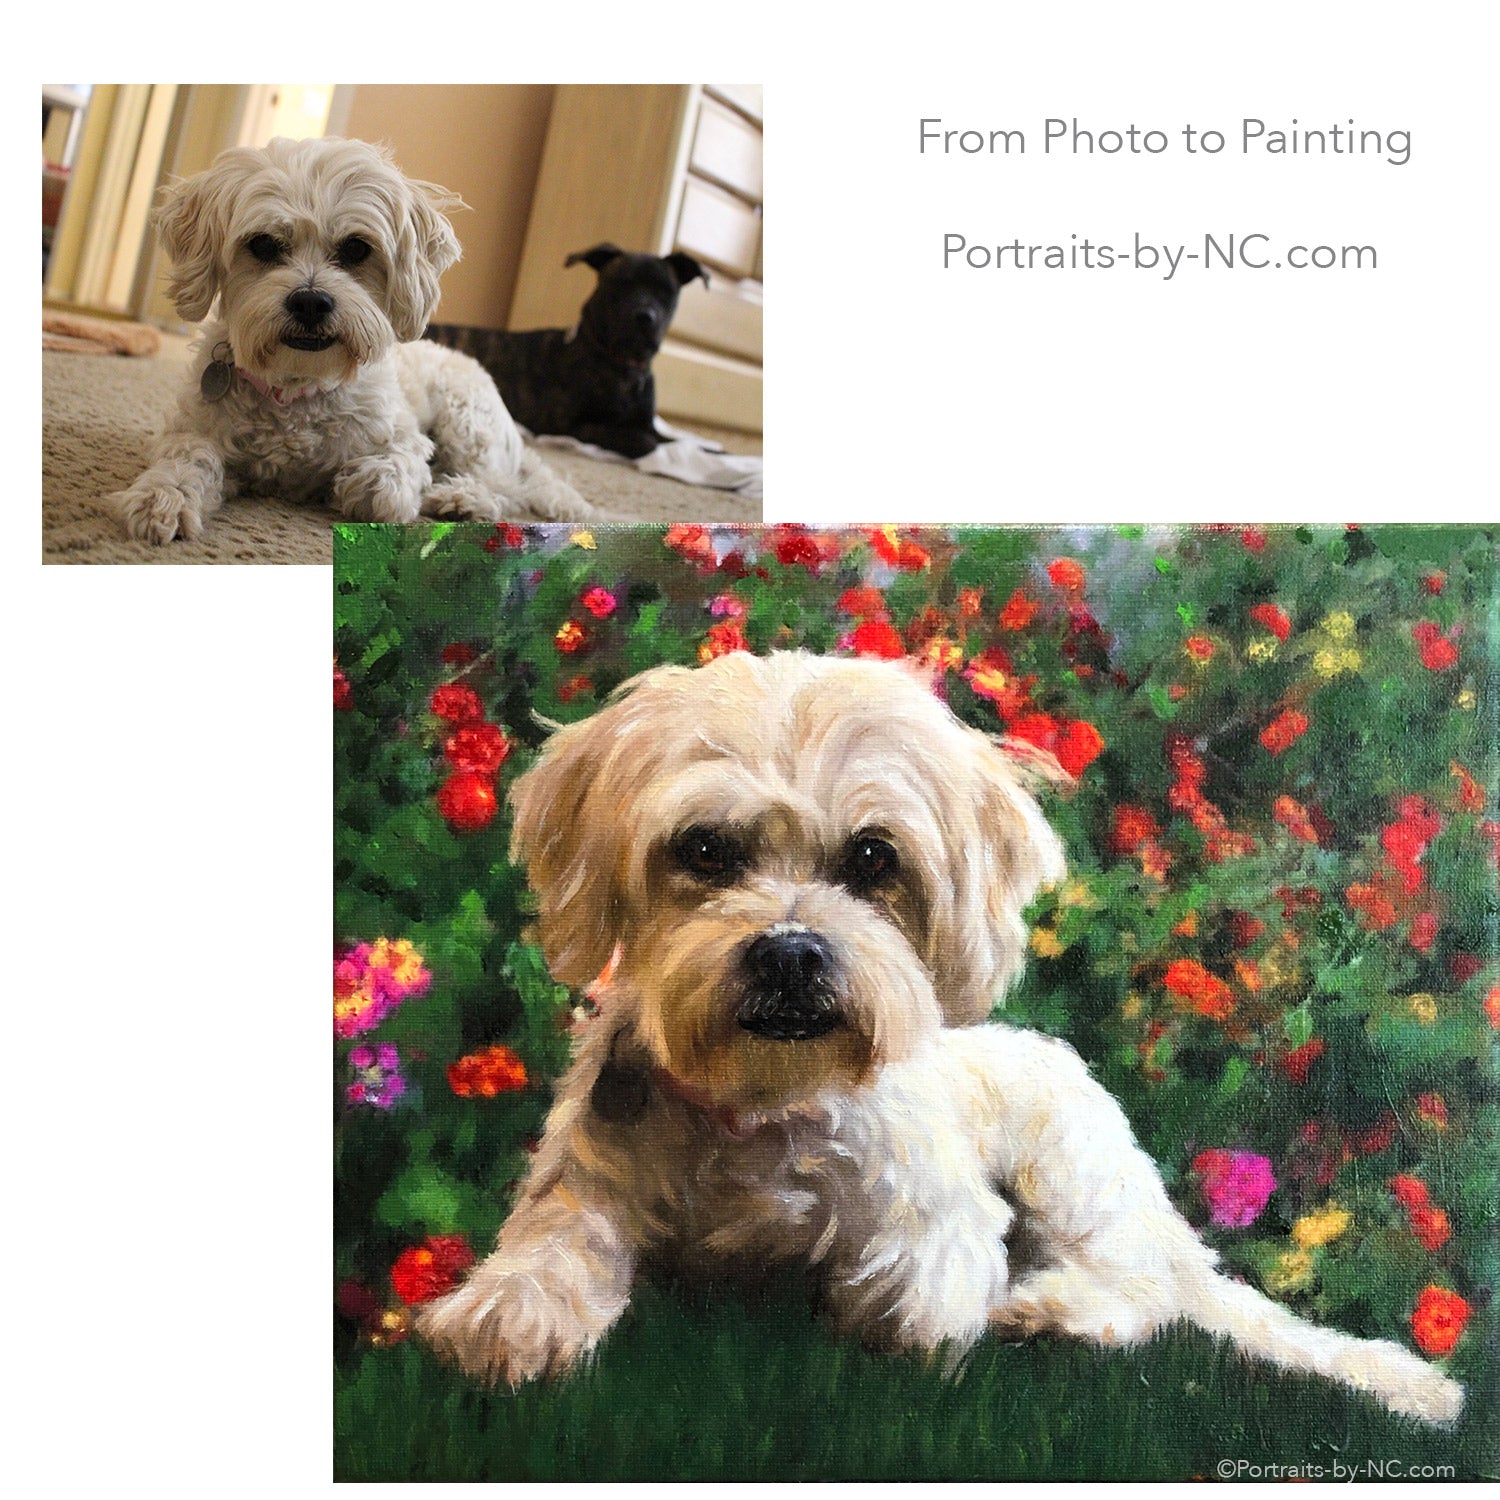 Lhasa Apso/poodle mix painted from photo